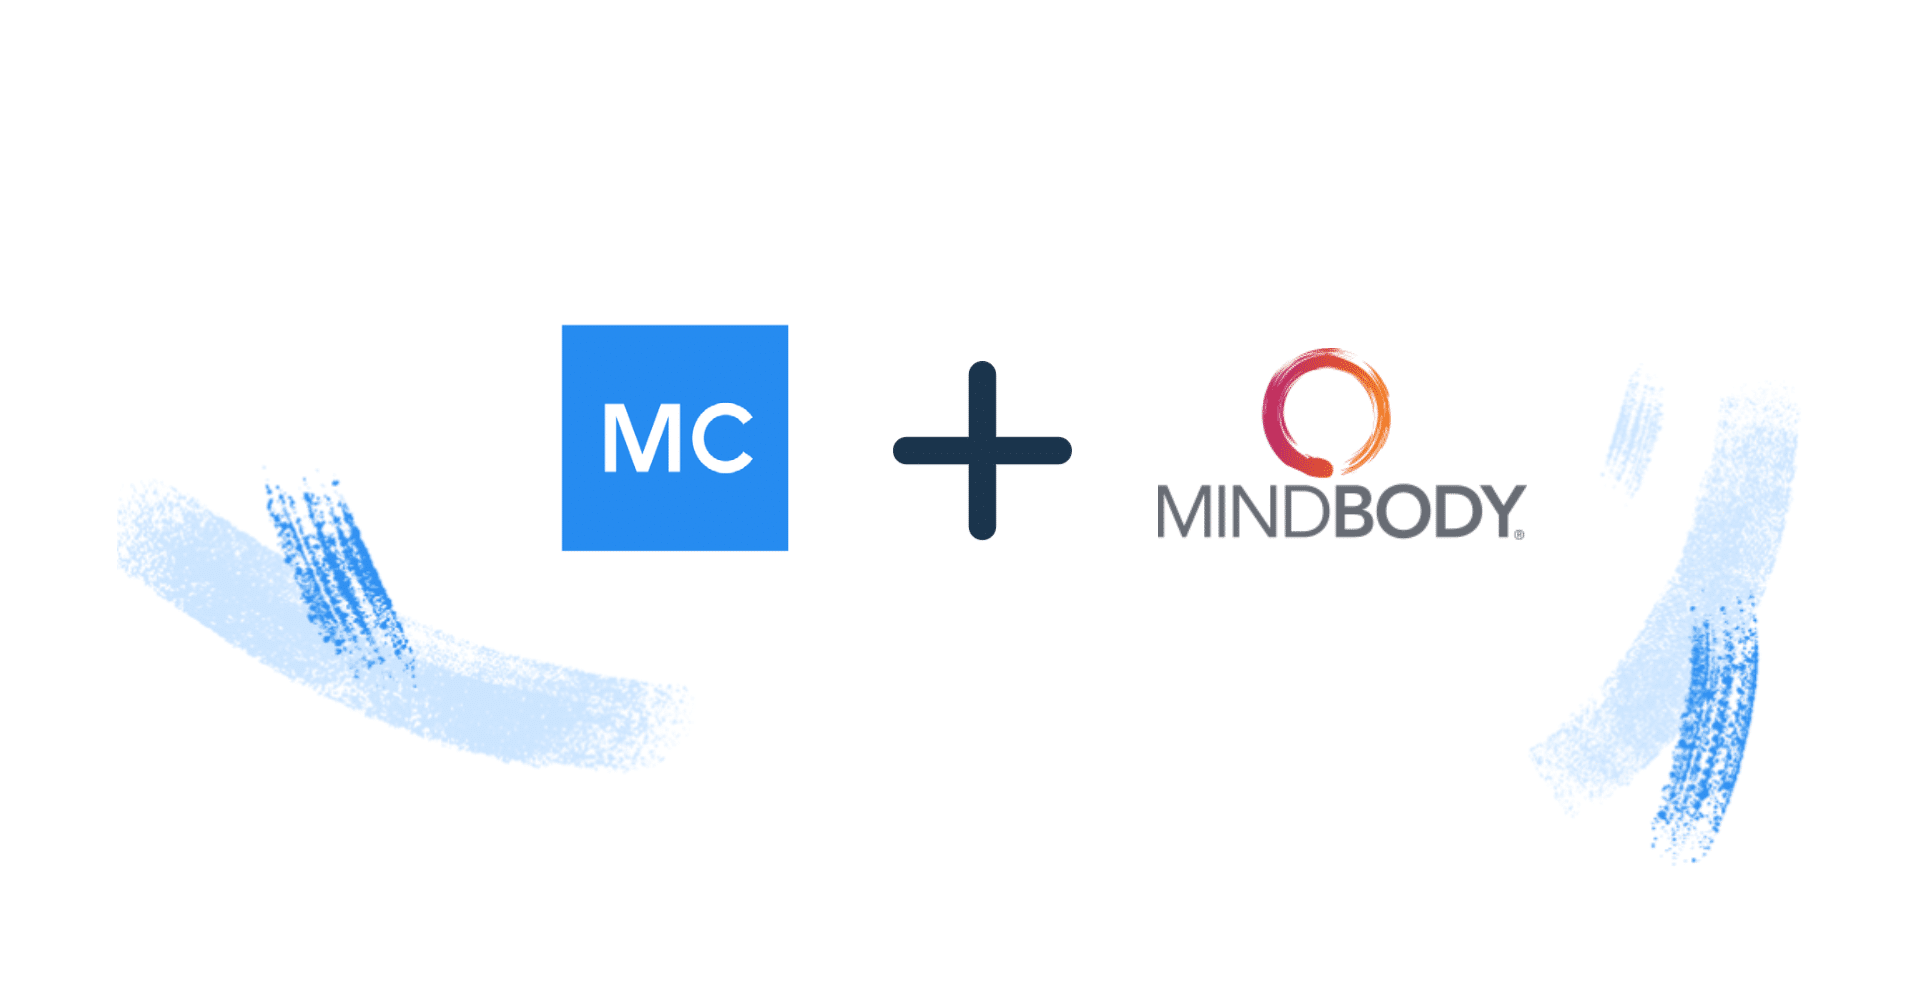 Case Study: How Mindbody Achieves End-to-End Data Trust with Monte Carlo